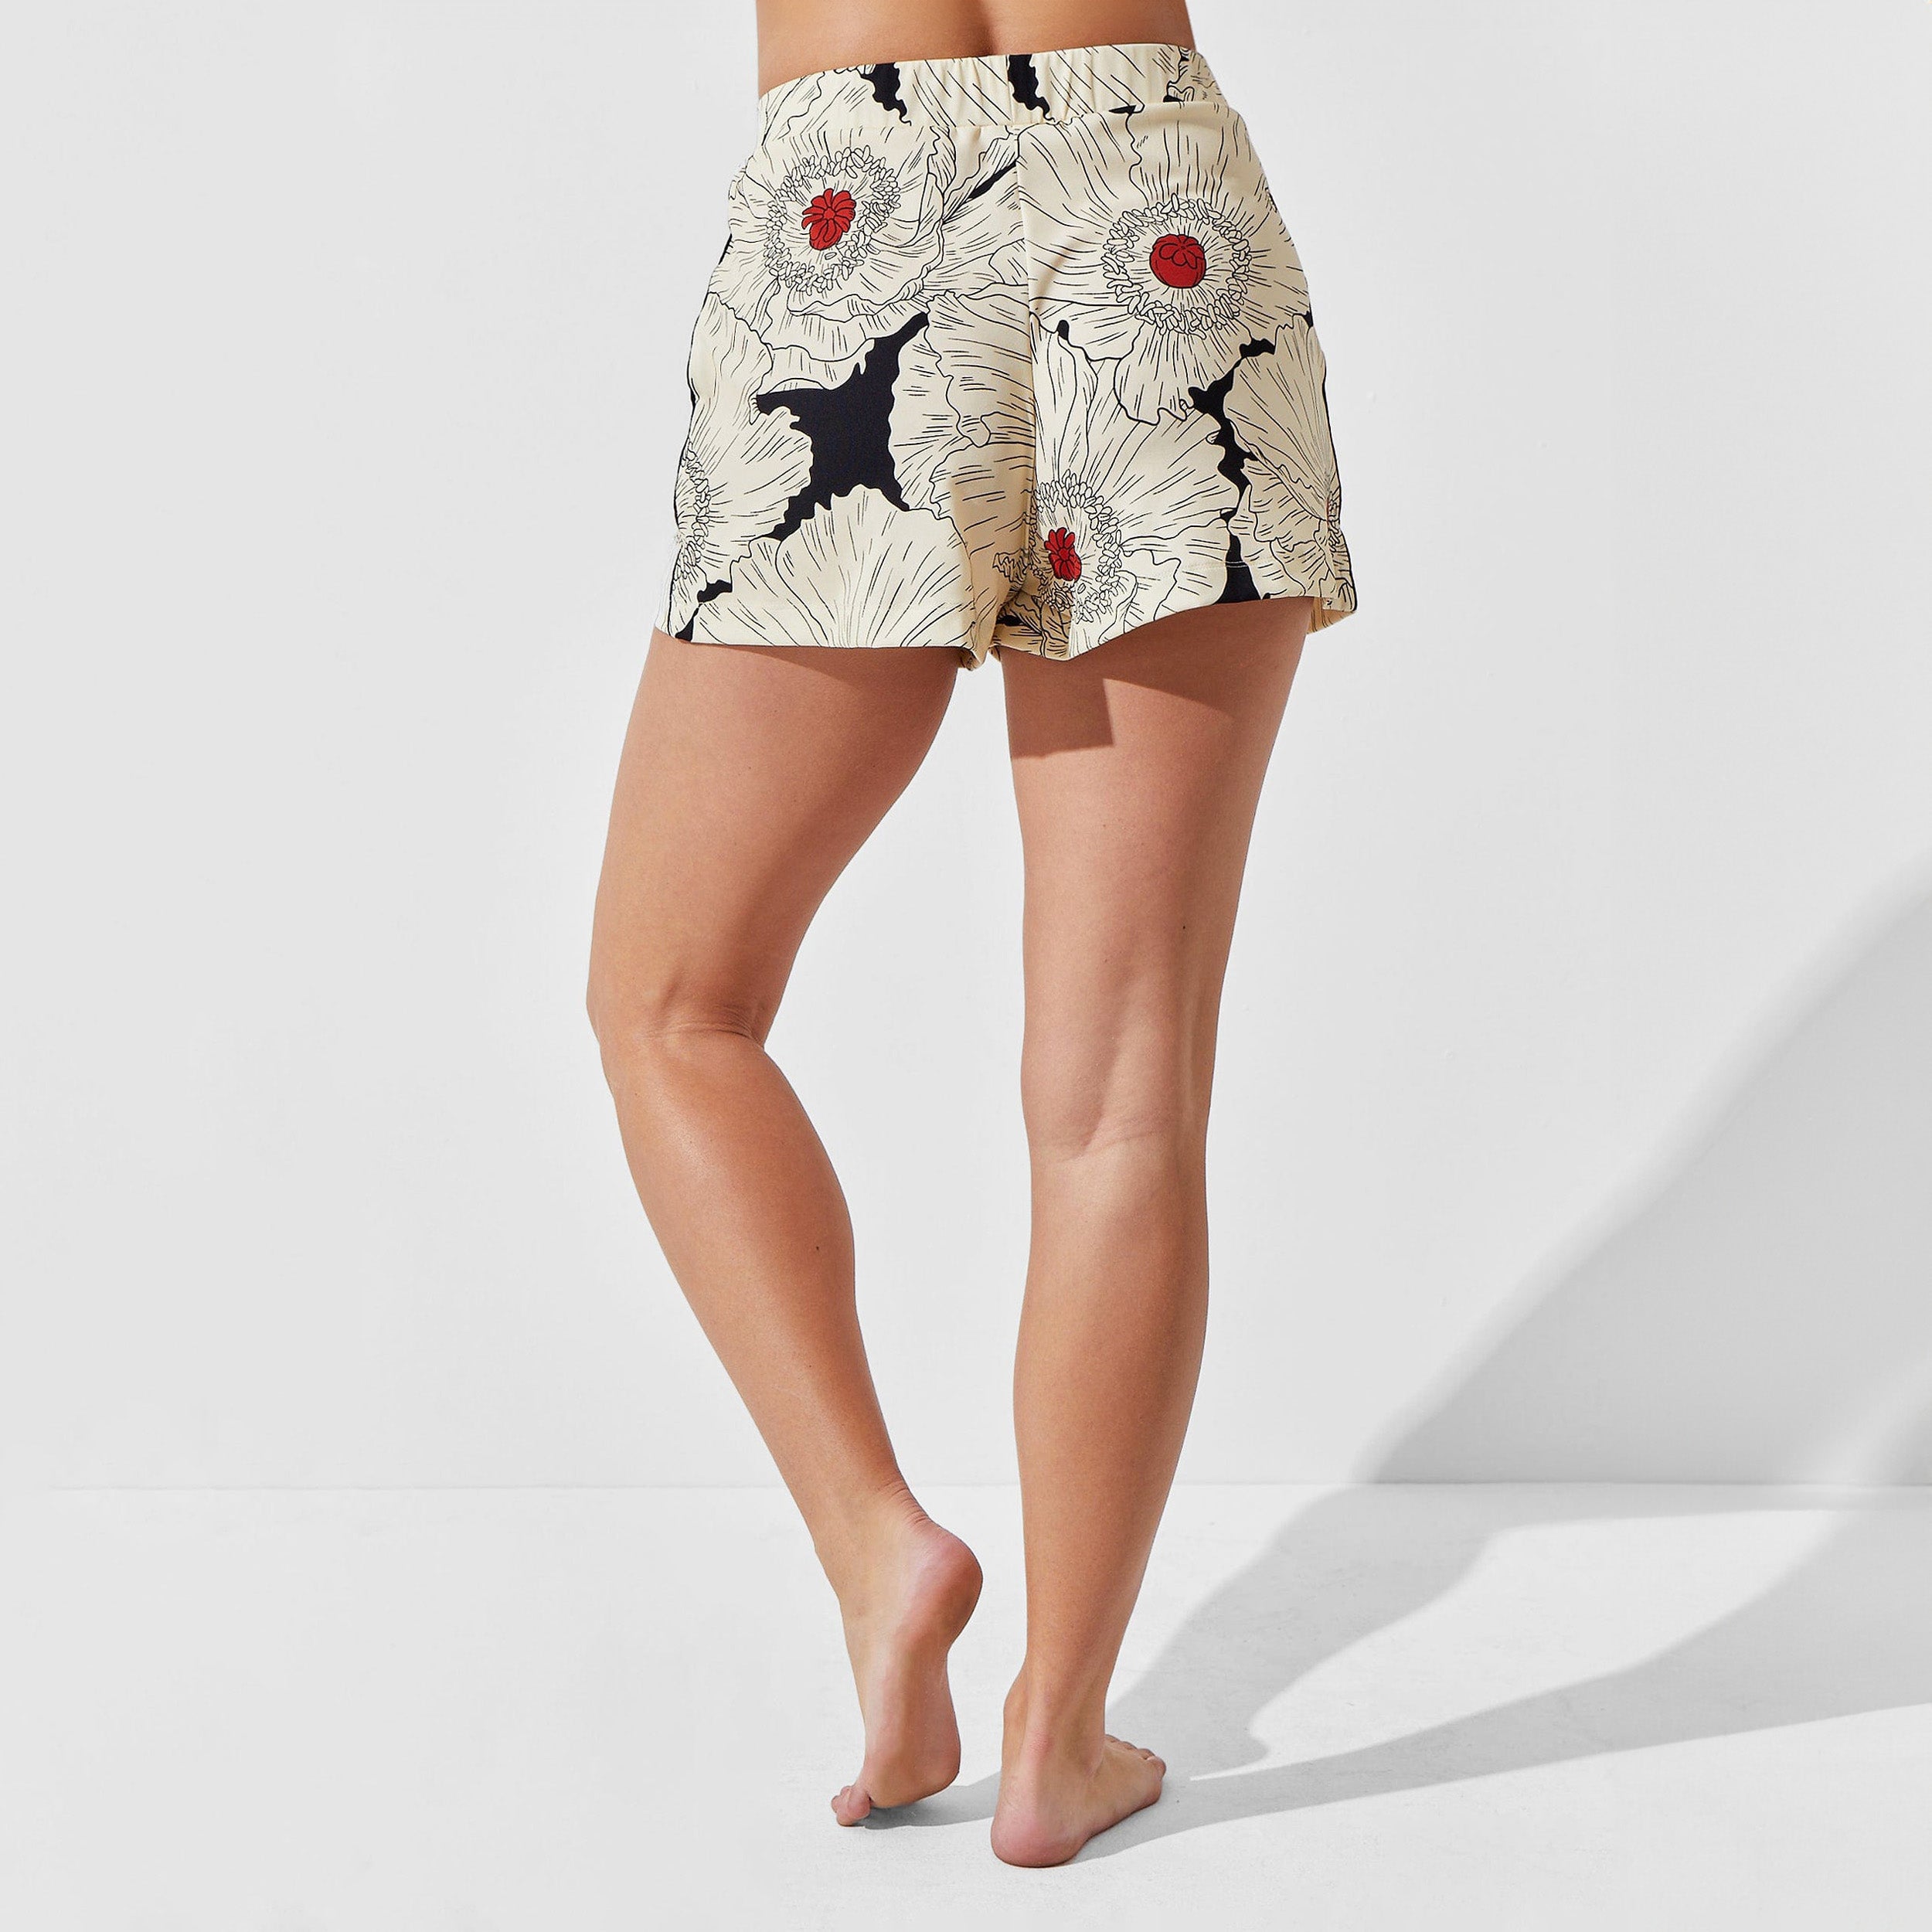 Rear view of woman wearing breathable, relaxed and butter smooth pajama short featuring a high-waist cut, side pockets and stunning Poppy floral print